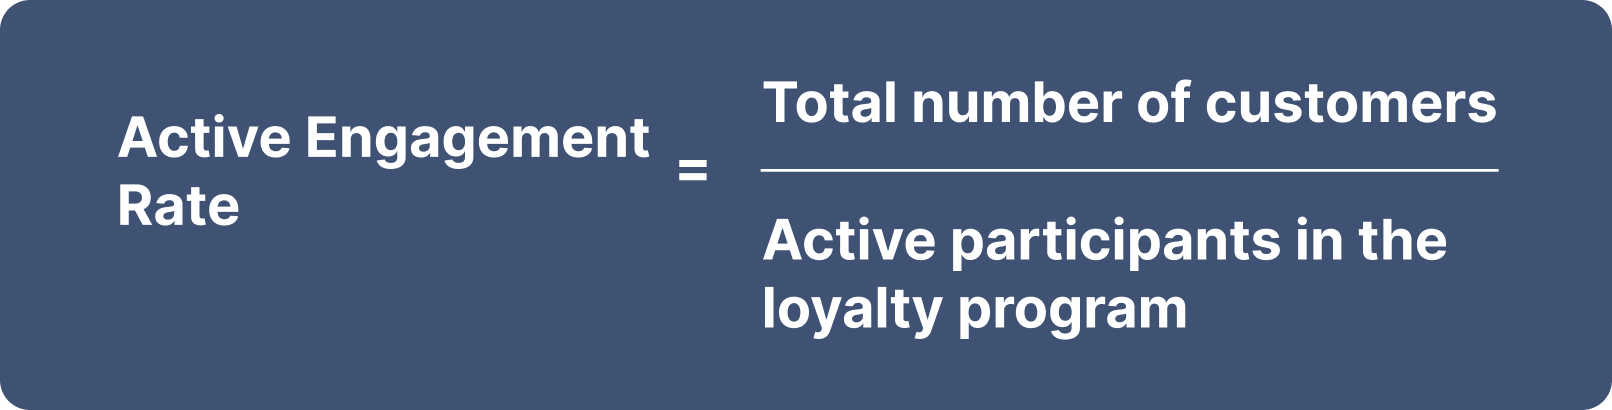 6. Active engagement rate